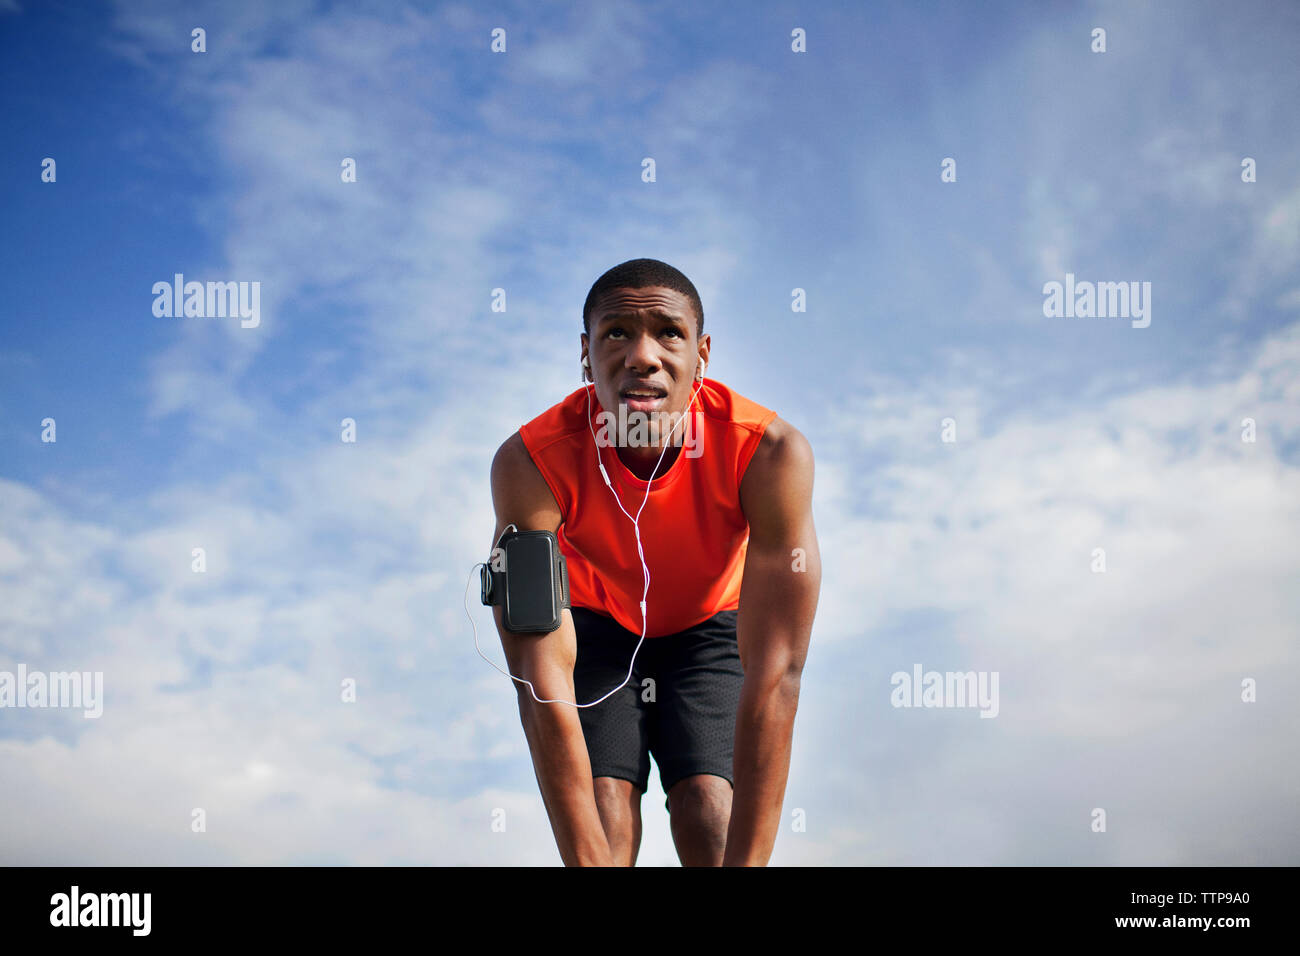 Low angle view of man exercising against cloudy sky on sunny day Stock Photo